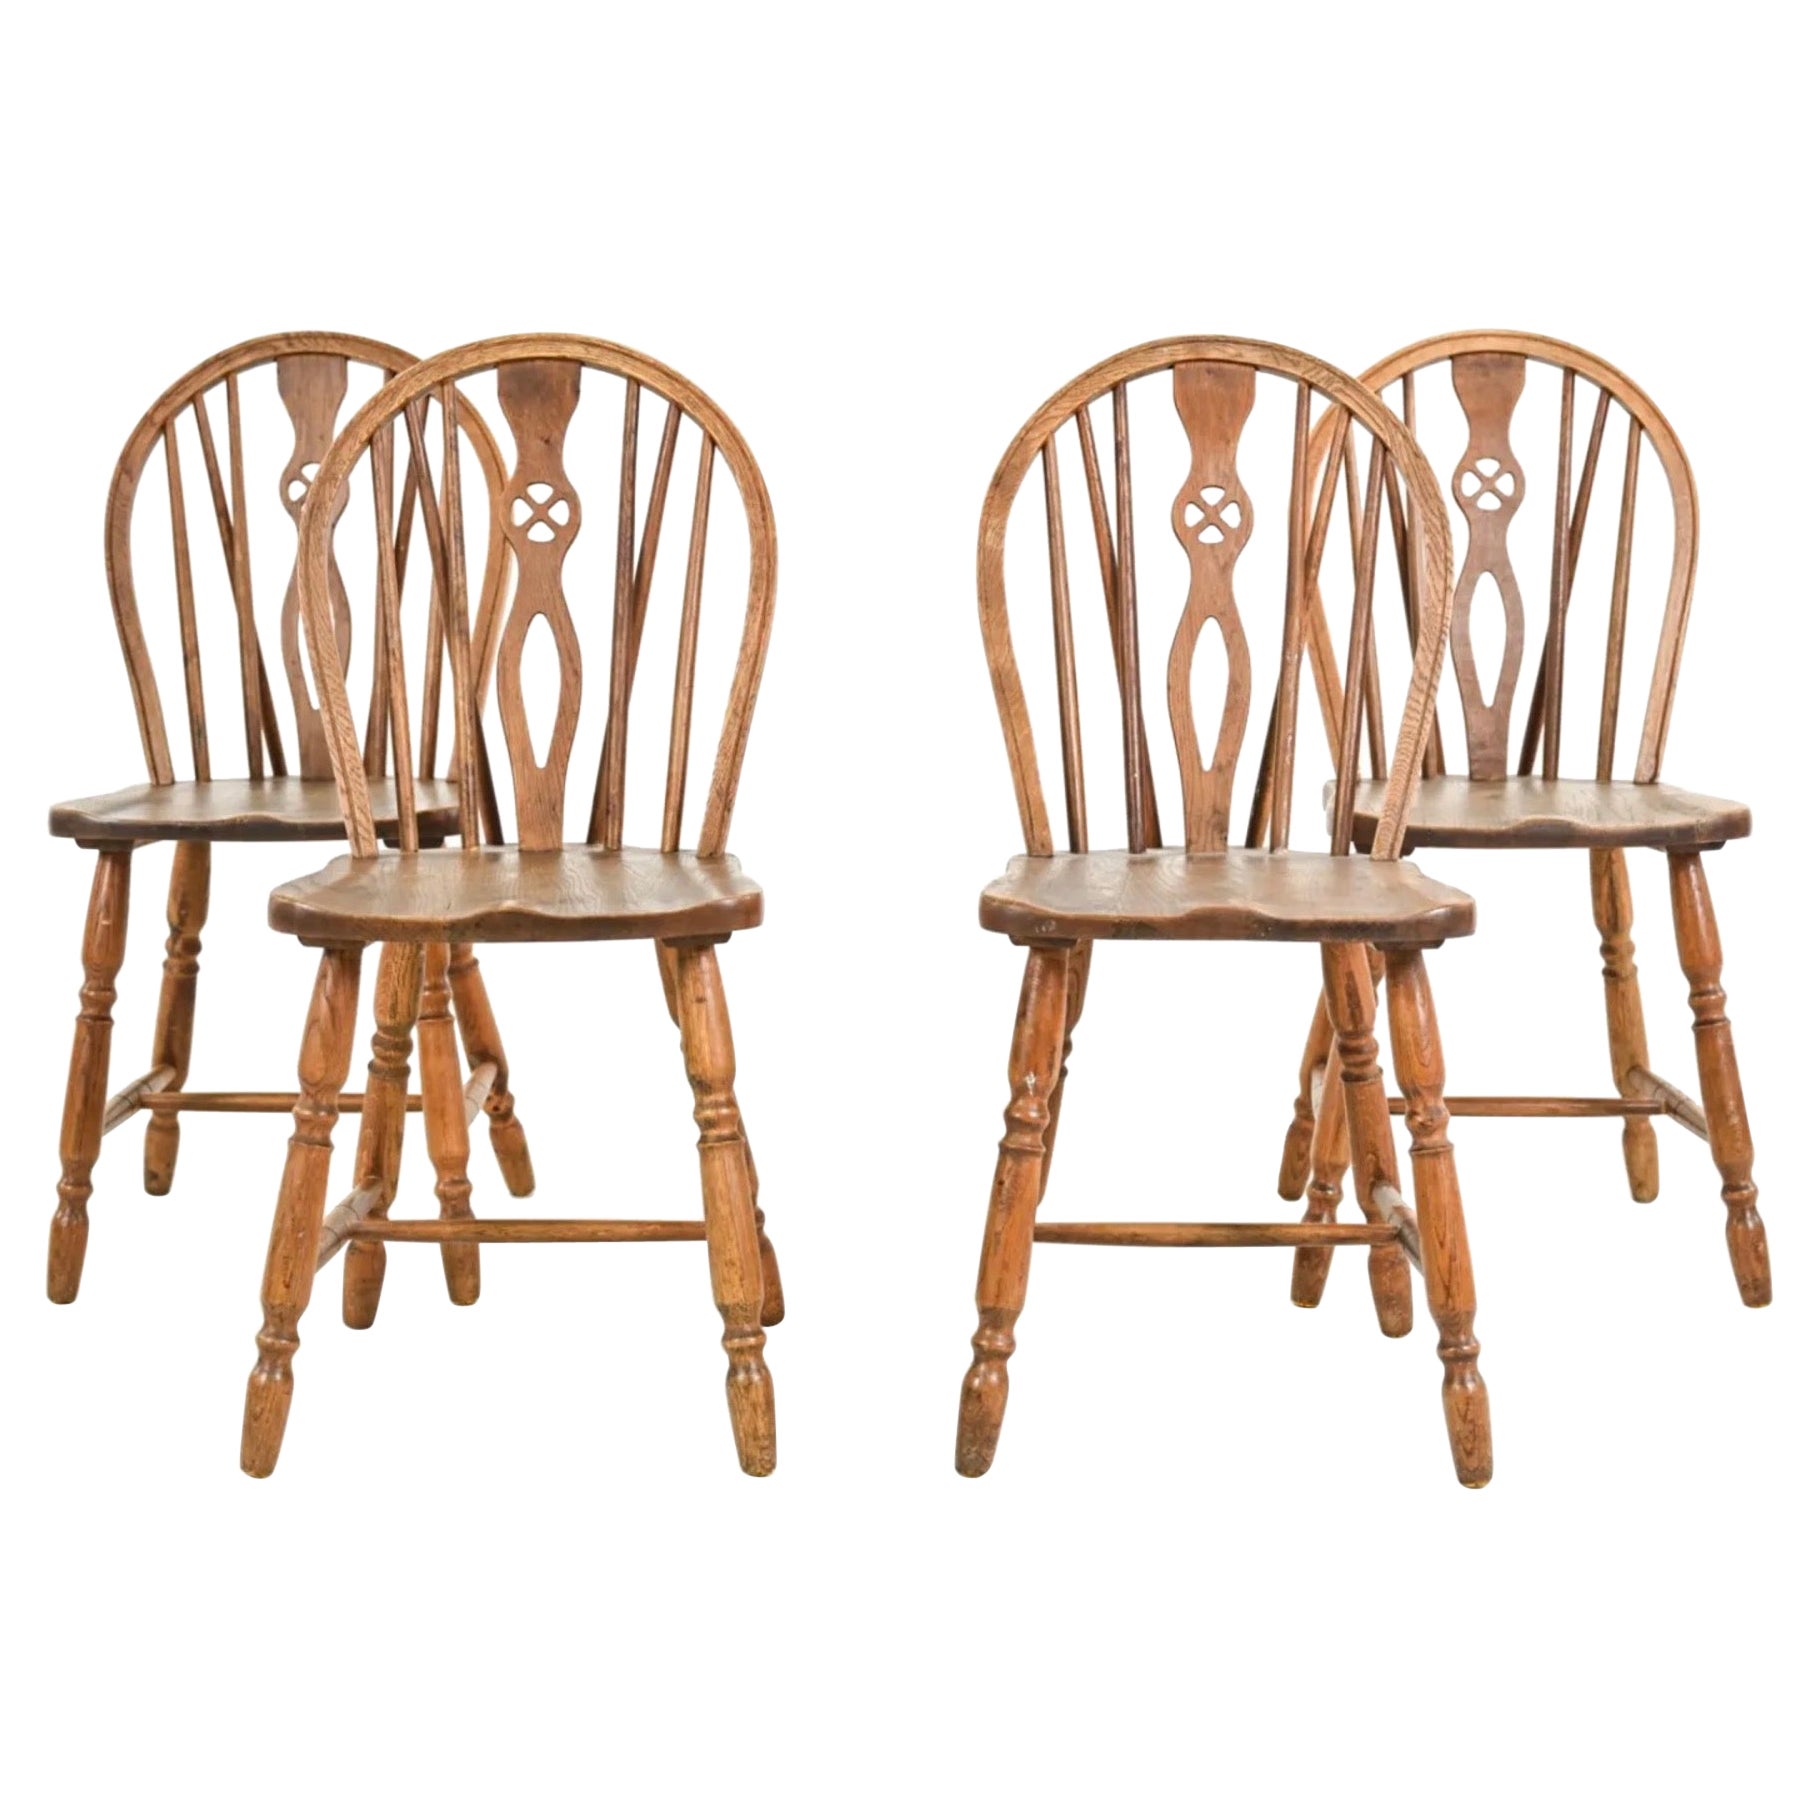 Set of 4 Yew Wood Windsor Style Dining Side Chairs